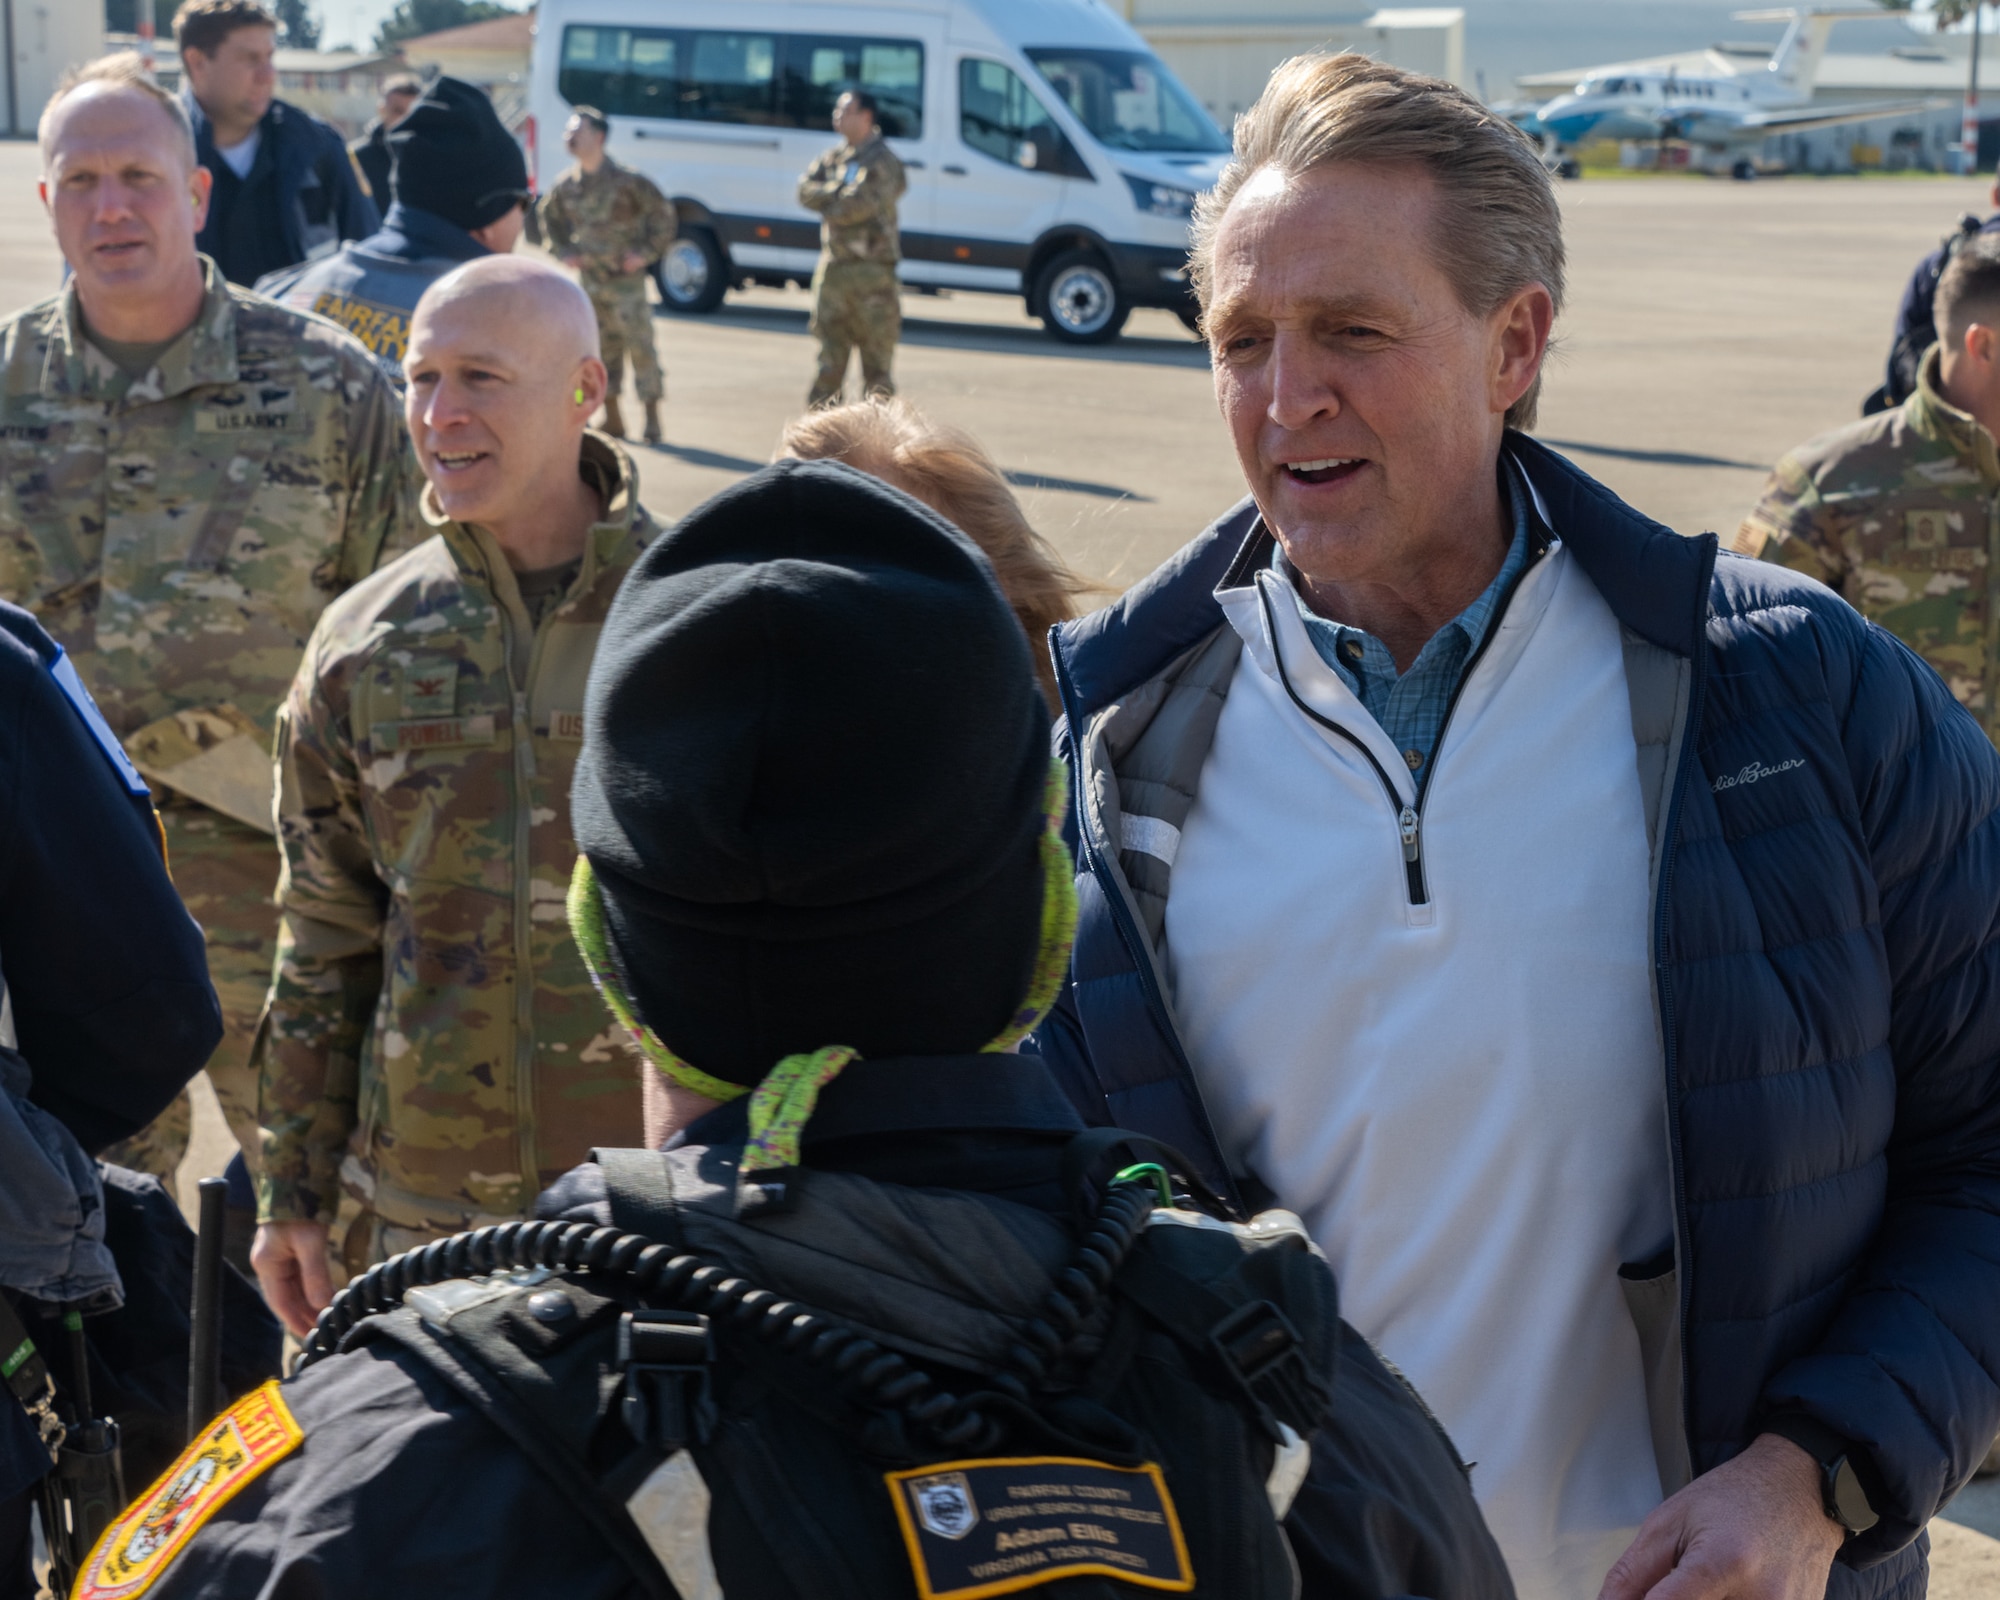 U.S. Ambassador Jeffry Flake, U.S. Ambassador to Türkiye, right, shakes hands with a member of the United States Agency for International Development’s Disaster Assistance Response Team, left, during their arrival at Incirlik Air Base, Türkiye, Feb 8, 2023. Ambassador Flake visited Incirlik AB to greet members of the USAID team, following a series of earthquakes that struck central-southern Türkiye on Feb 6, 2023. As Ambassador to Türkiye, Flake holds the highest civilian position as The Chief of Mission, and impacts the communication and resources of U.S. personnel, advancing the U.S. foreign policy goals. As a fellow NATO ally, the U.S. Government mobilized personnel to assist in Türkiye in their response efforts. (U.S. Air Force photo by Senior Airman David D. McLoney)